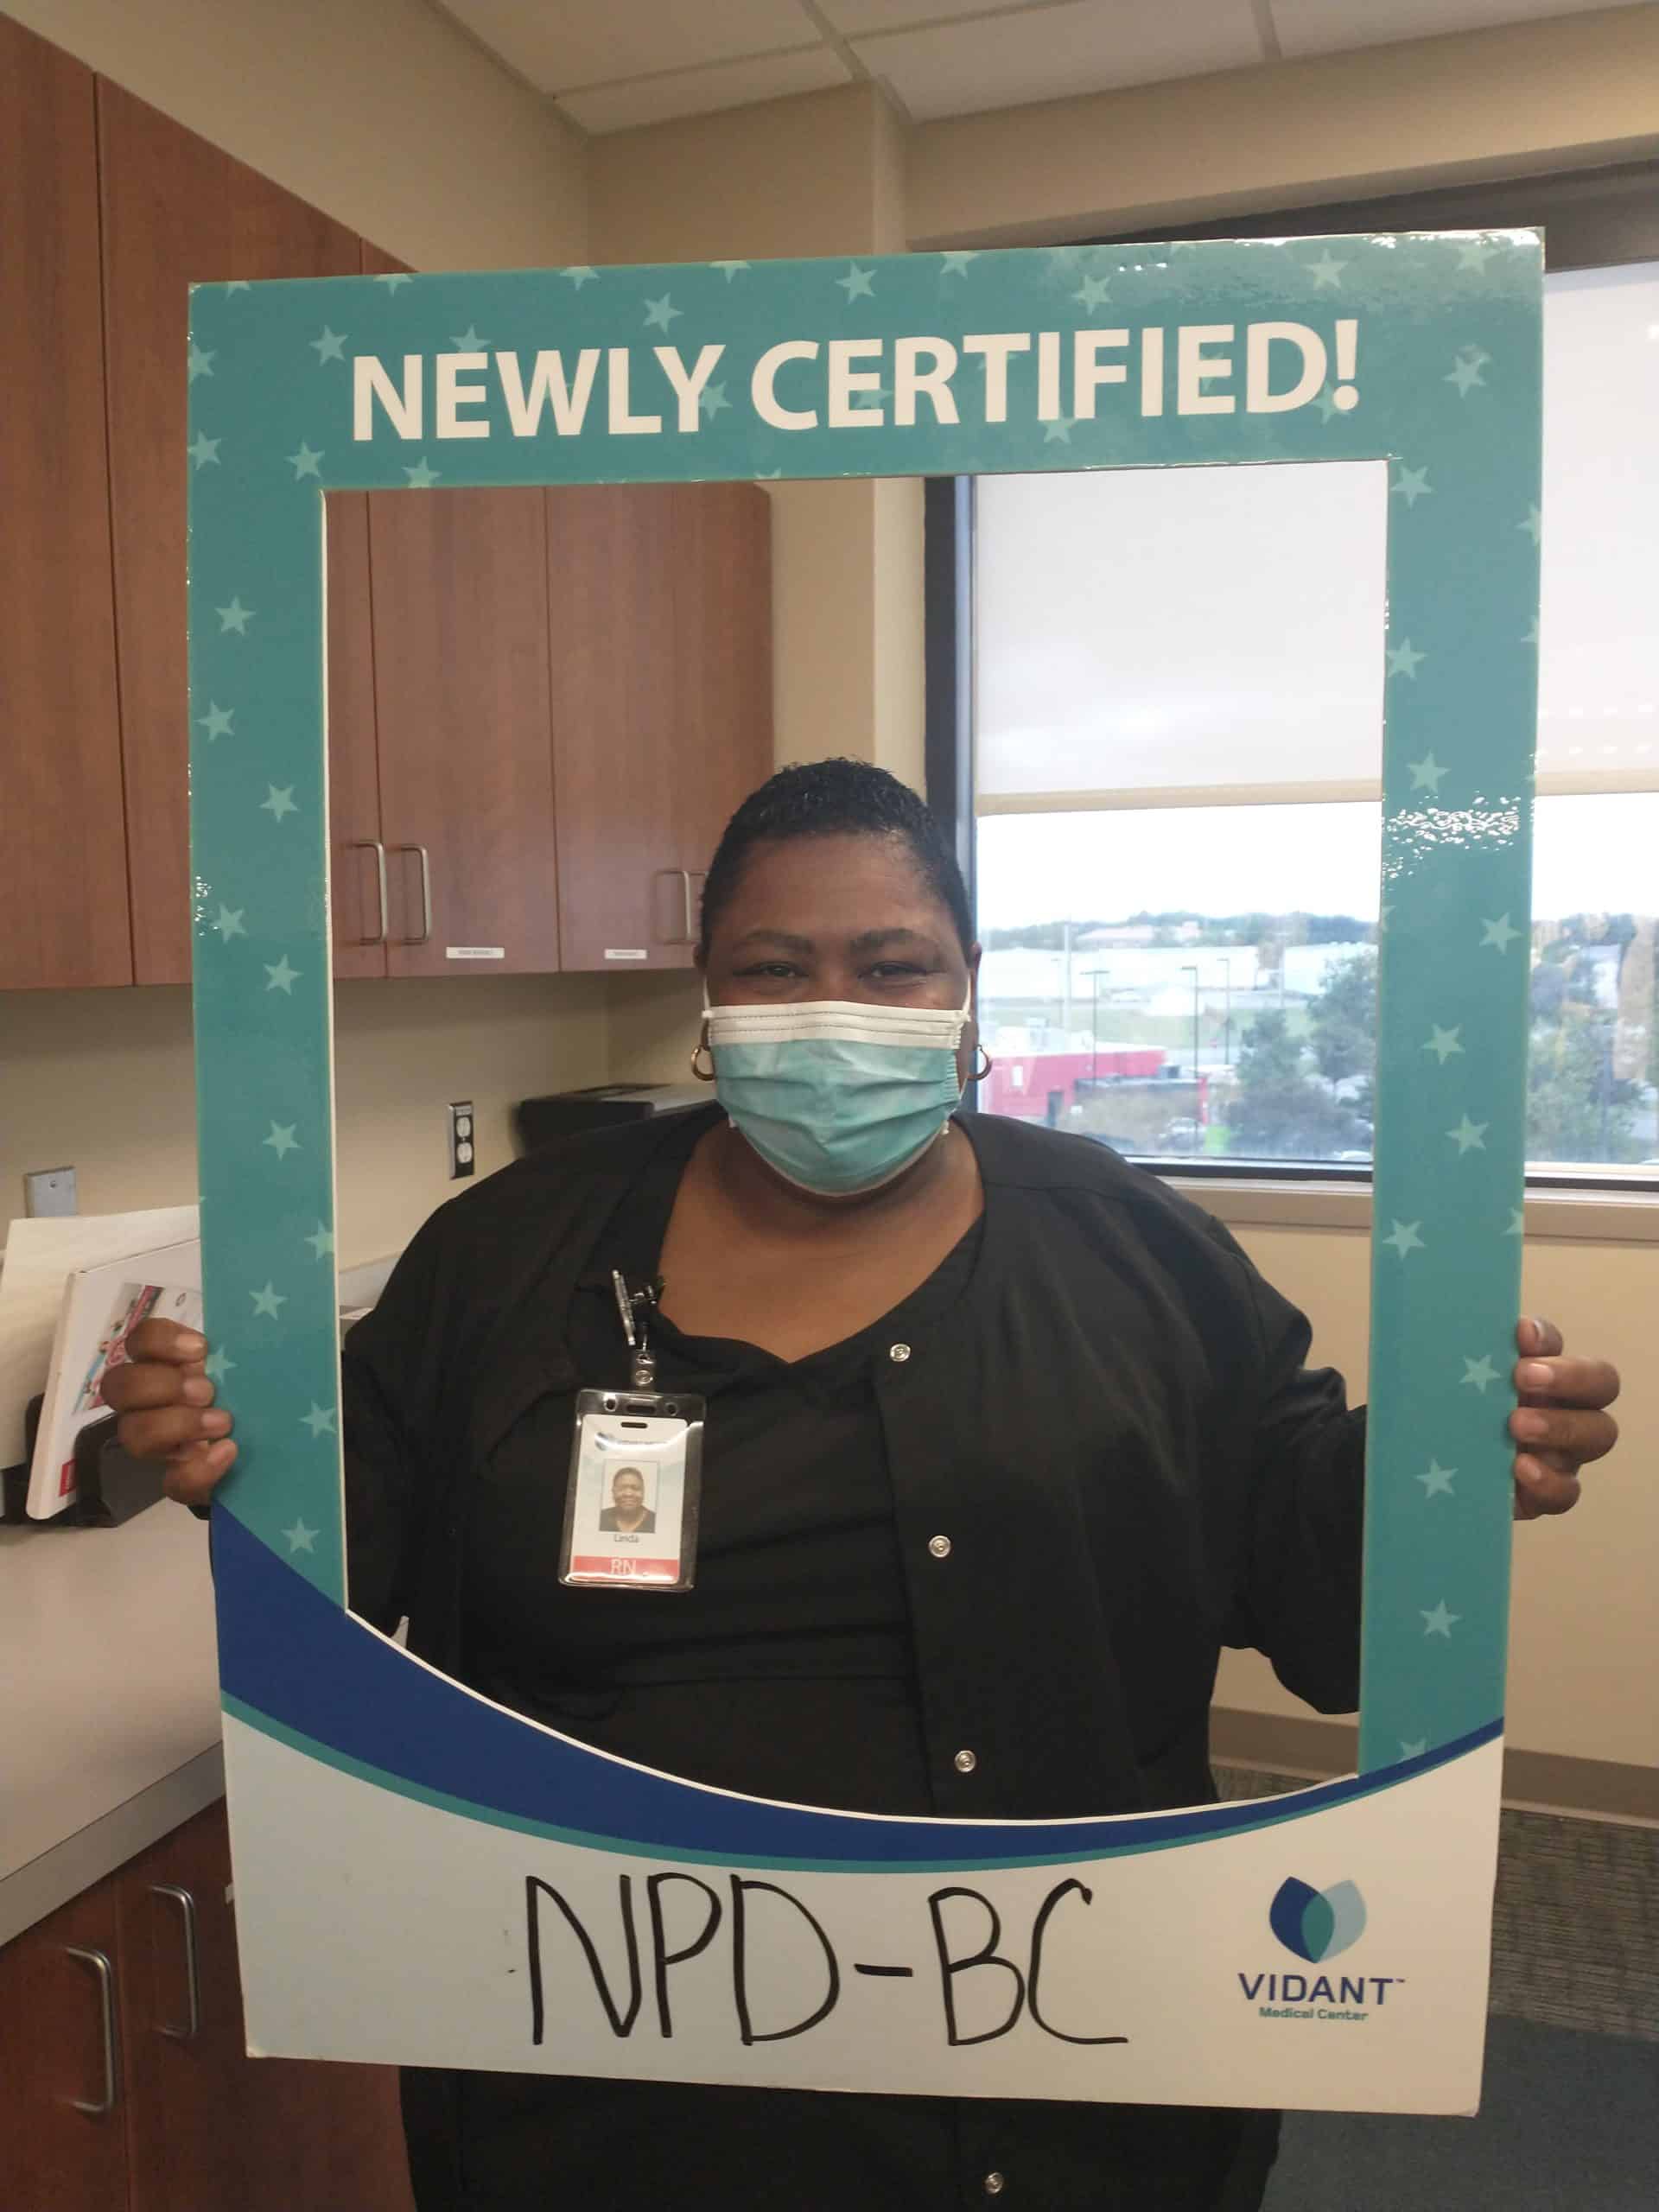 Linda Bond, MSN, RN, NPD-BC, works in the Center for Learning and Performance and she received her nursing professional development board certified